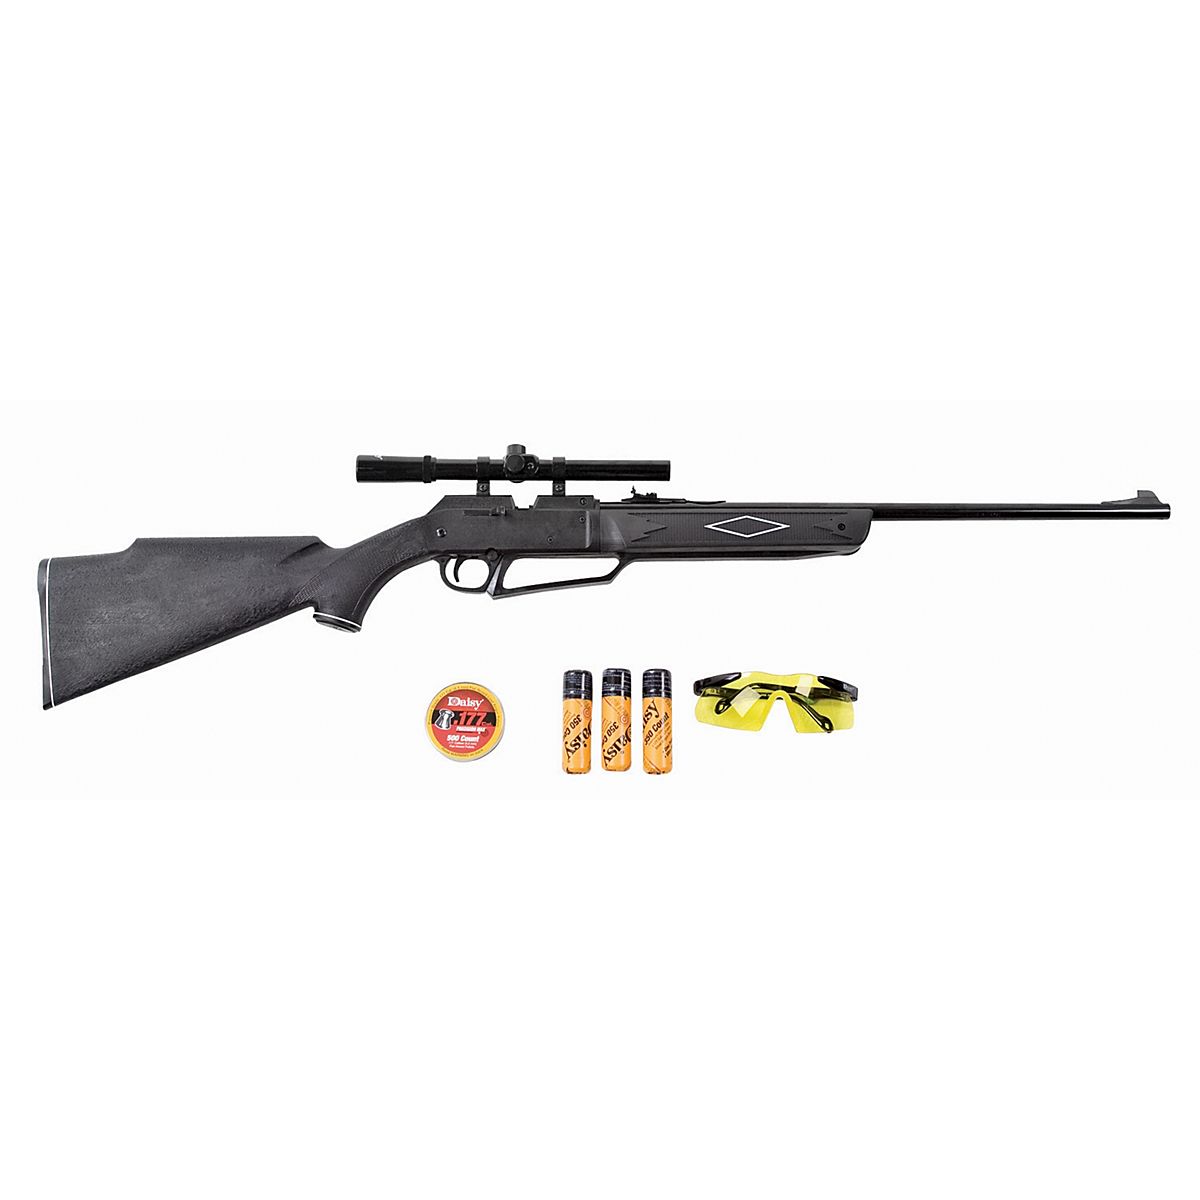 Daisy Powerline Air Rifle Kit Free Shipping At Academy